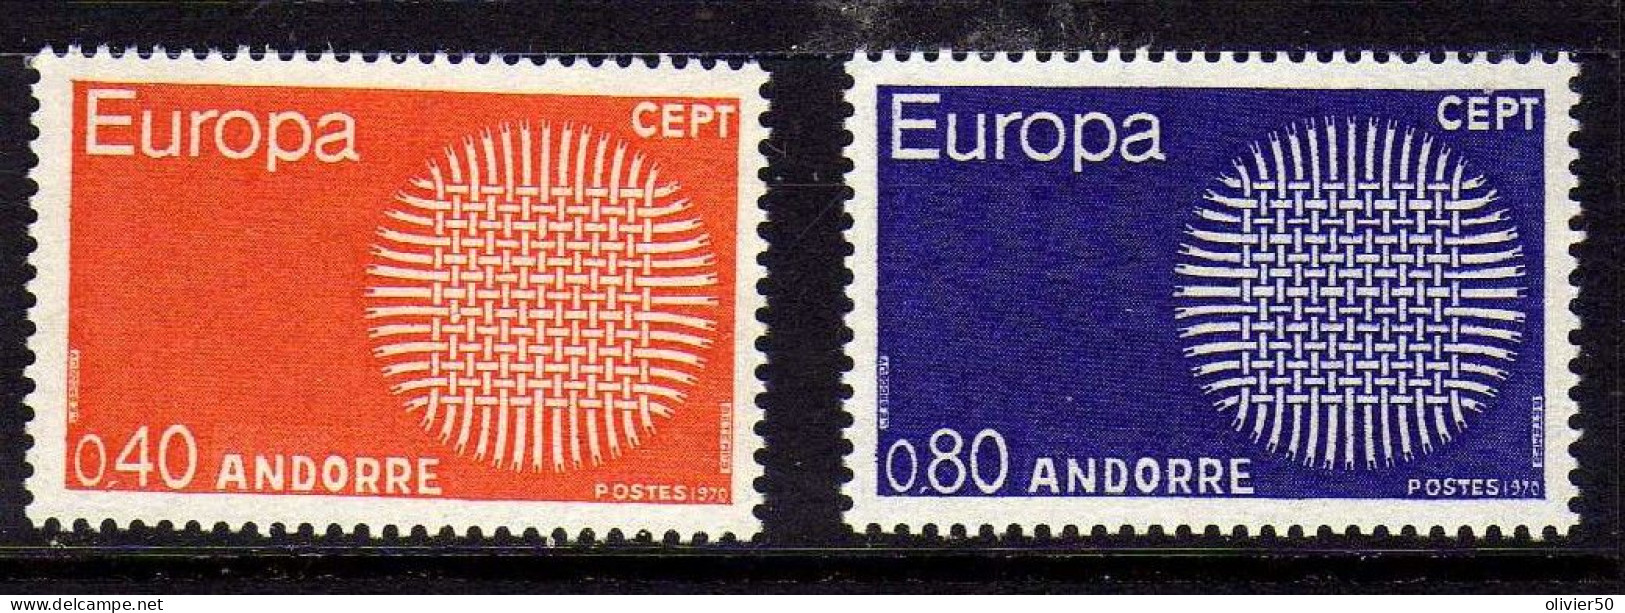 Andorre Francaise - 1970 - Europa   -Neufs** - MNH  - - Unused Stamps